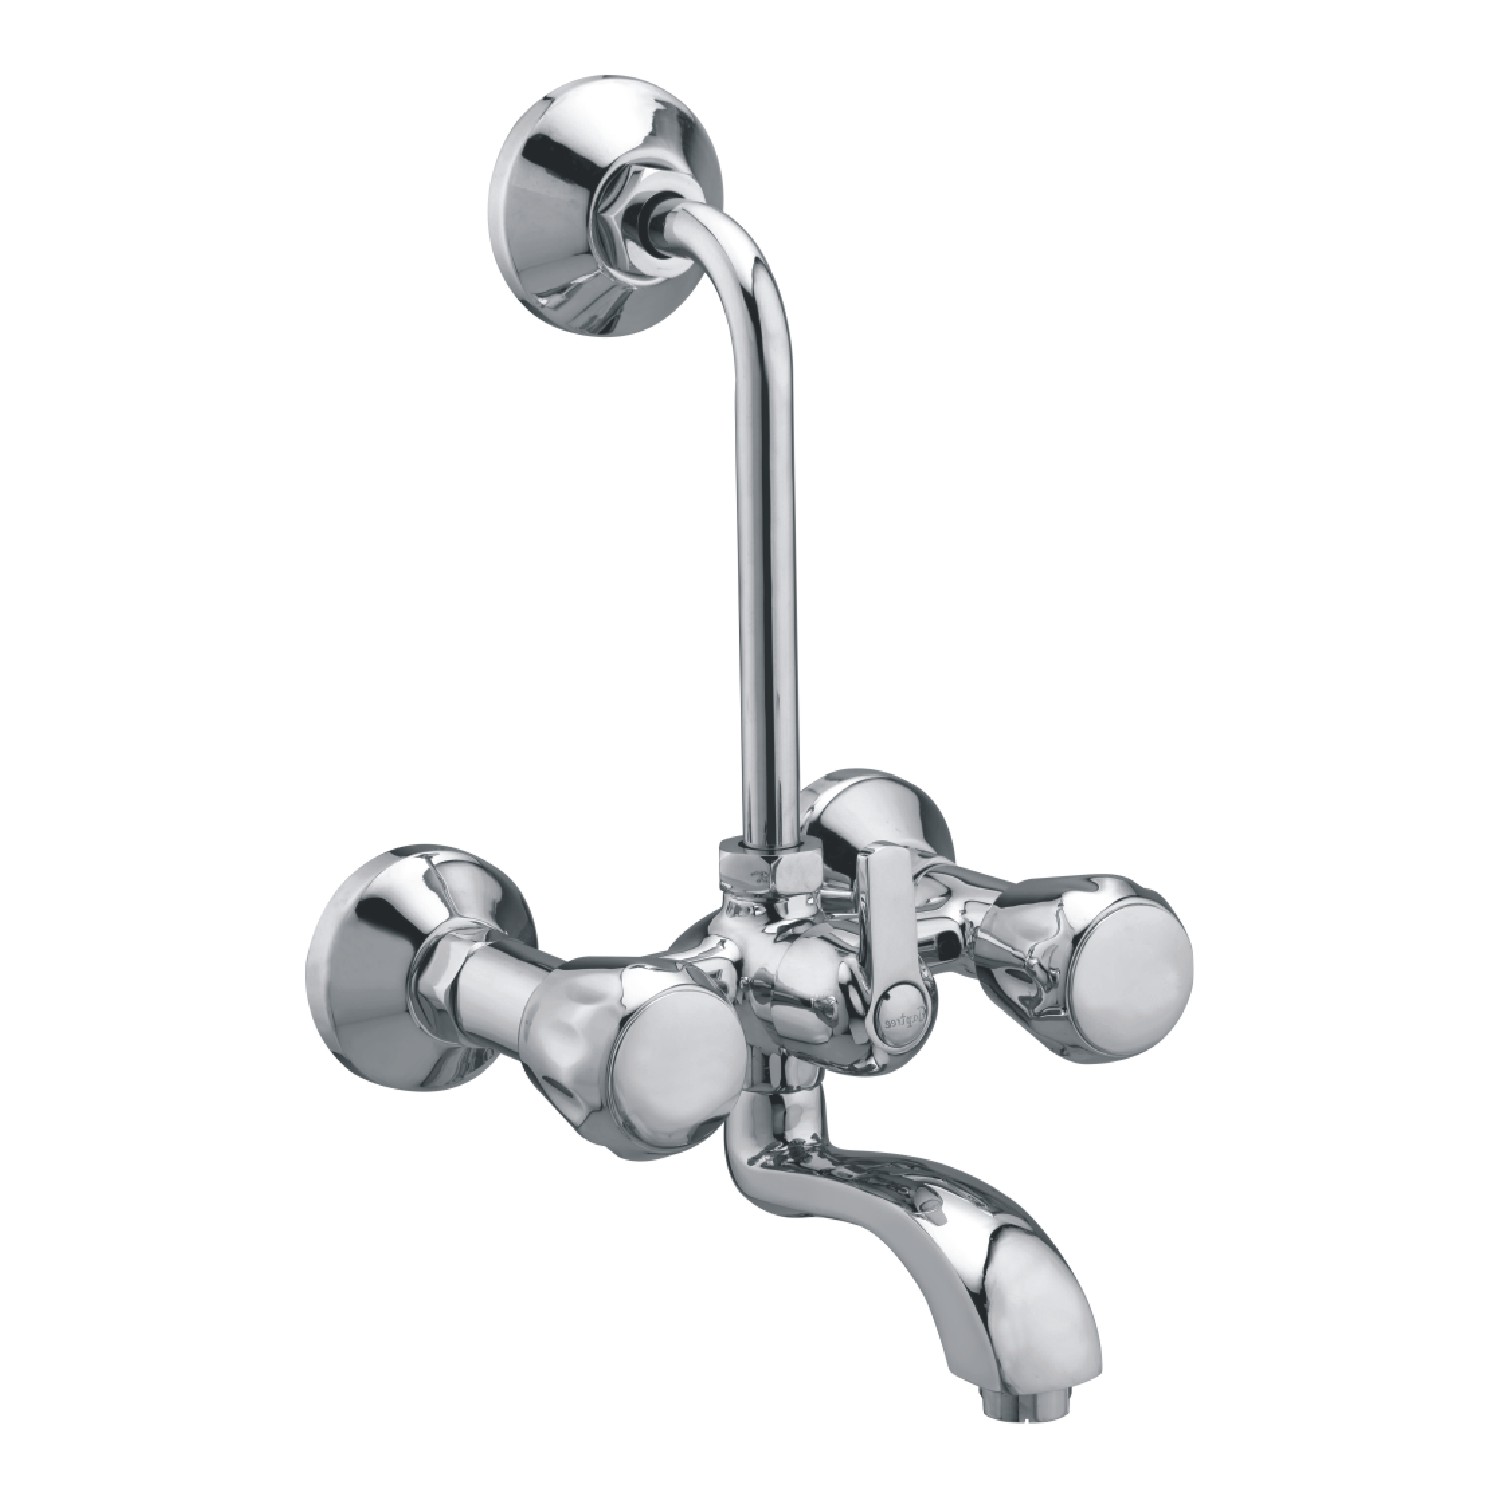 CONTINENTAL WALL MIXER WITH BEND